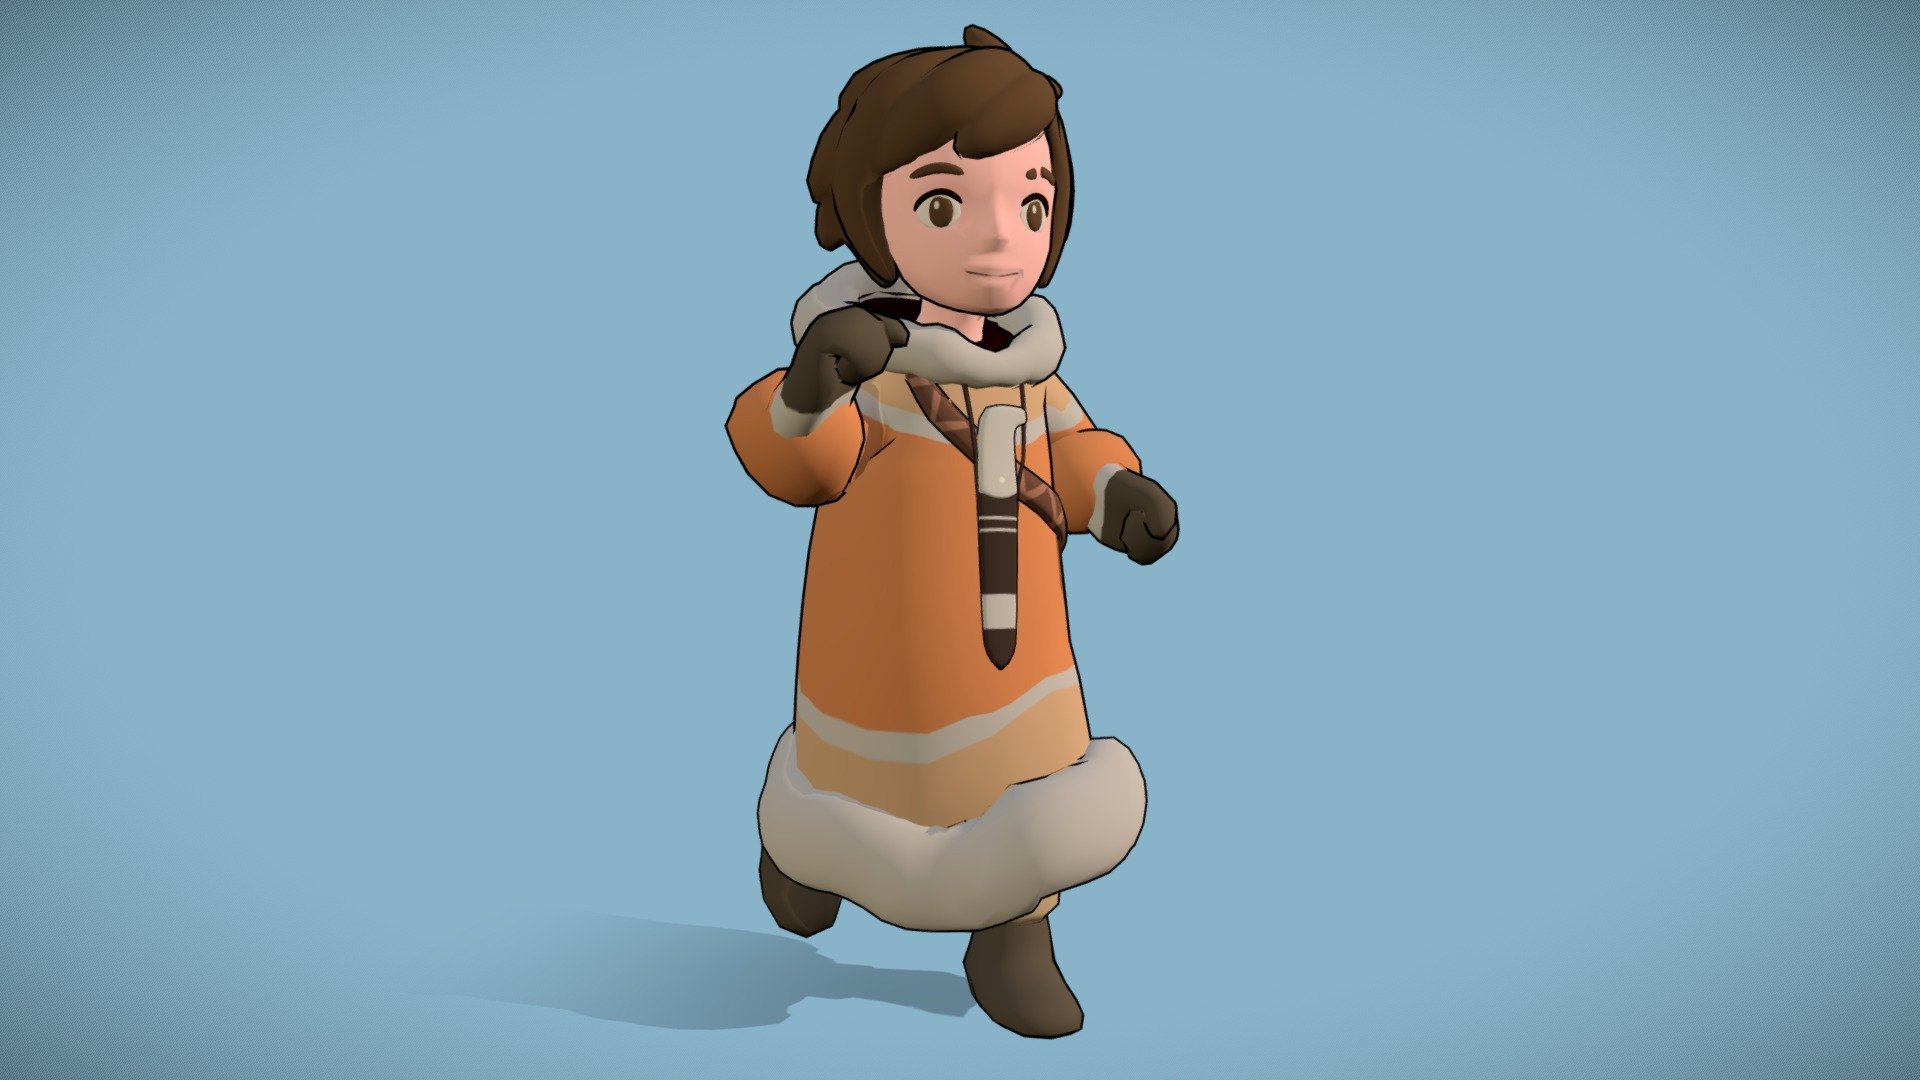 HKU school assignment
We had to make a sidecharacter that would fit the world of Ni No Kuni.
This is Aspen, snowman enthousiast and passionate about his craft.

It has some troubles with shadows within sketchfab and i don't really know how to fix it. It has something to do with the outline mesh 3d model